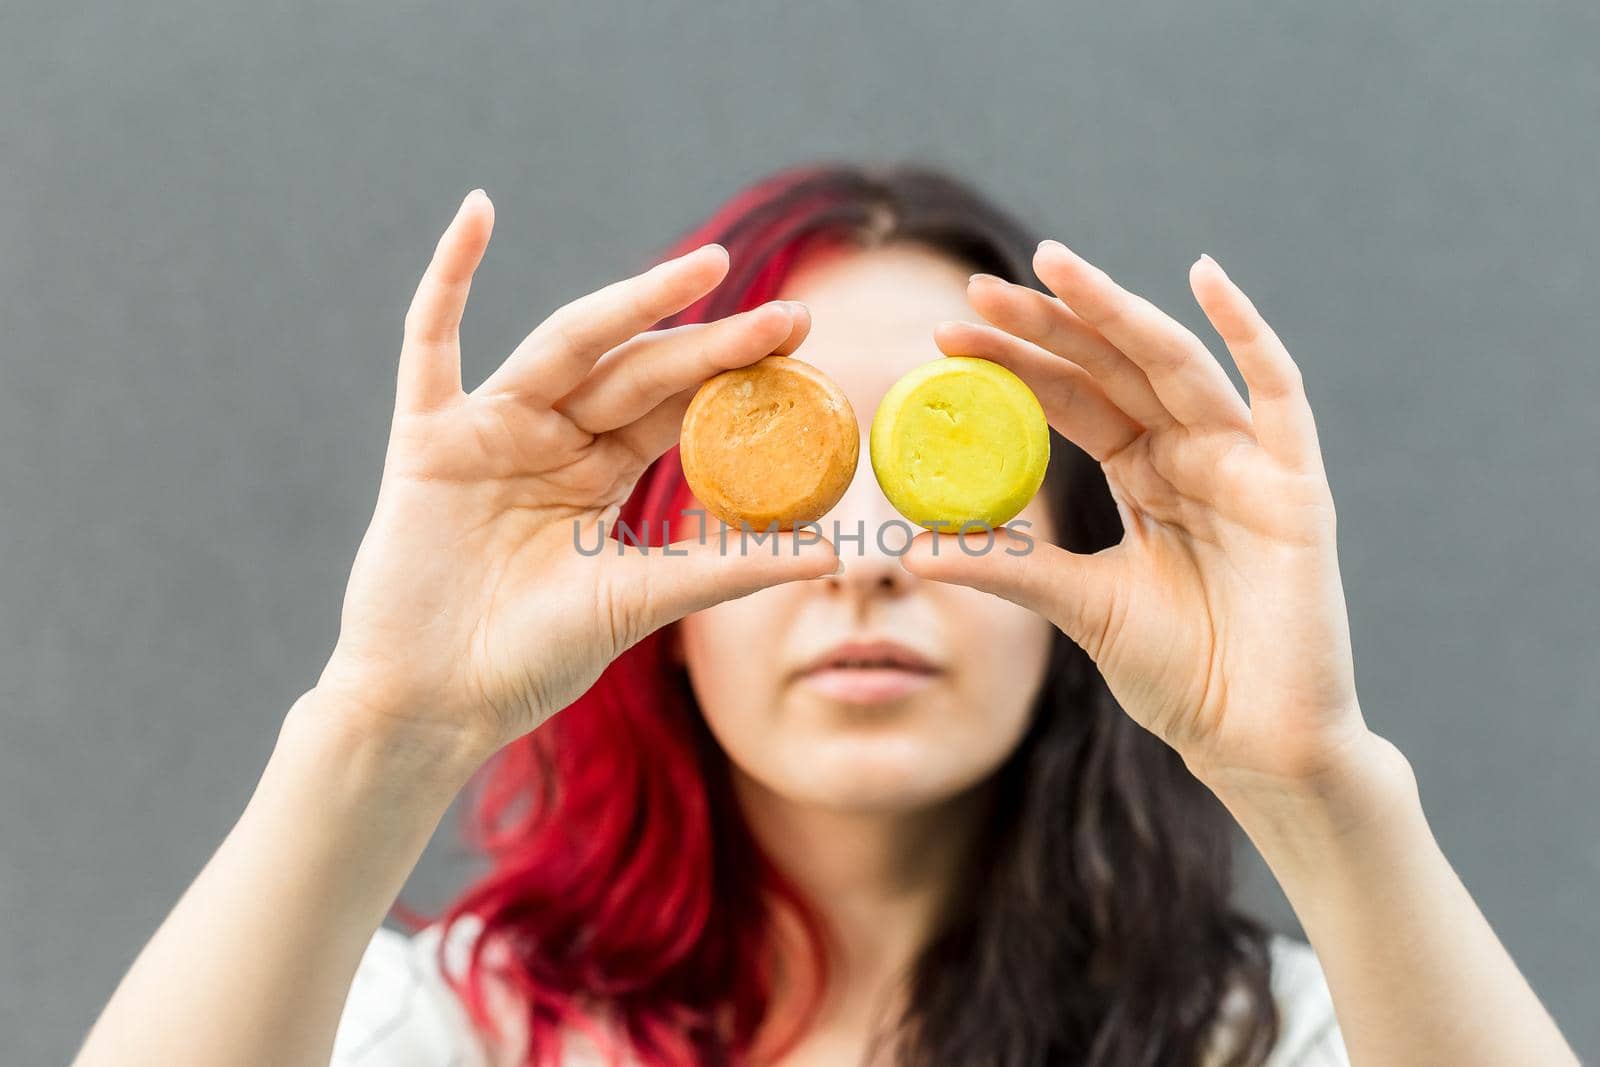 Woman holding organic soap or solid shampoo with no packaging over gray background. Healthy lifestyle, beauty, skin care, Zero waste concept.